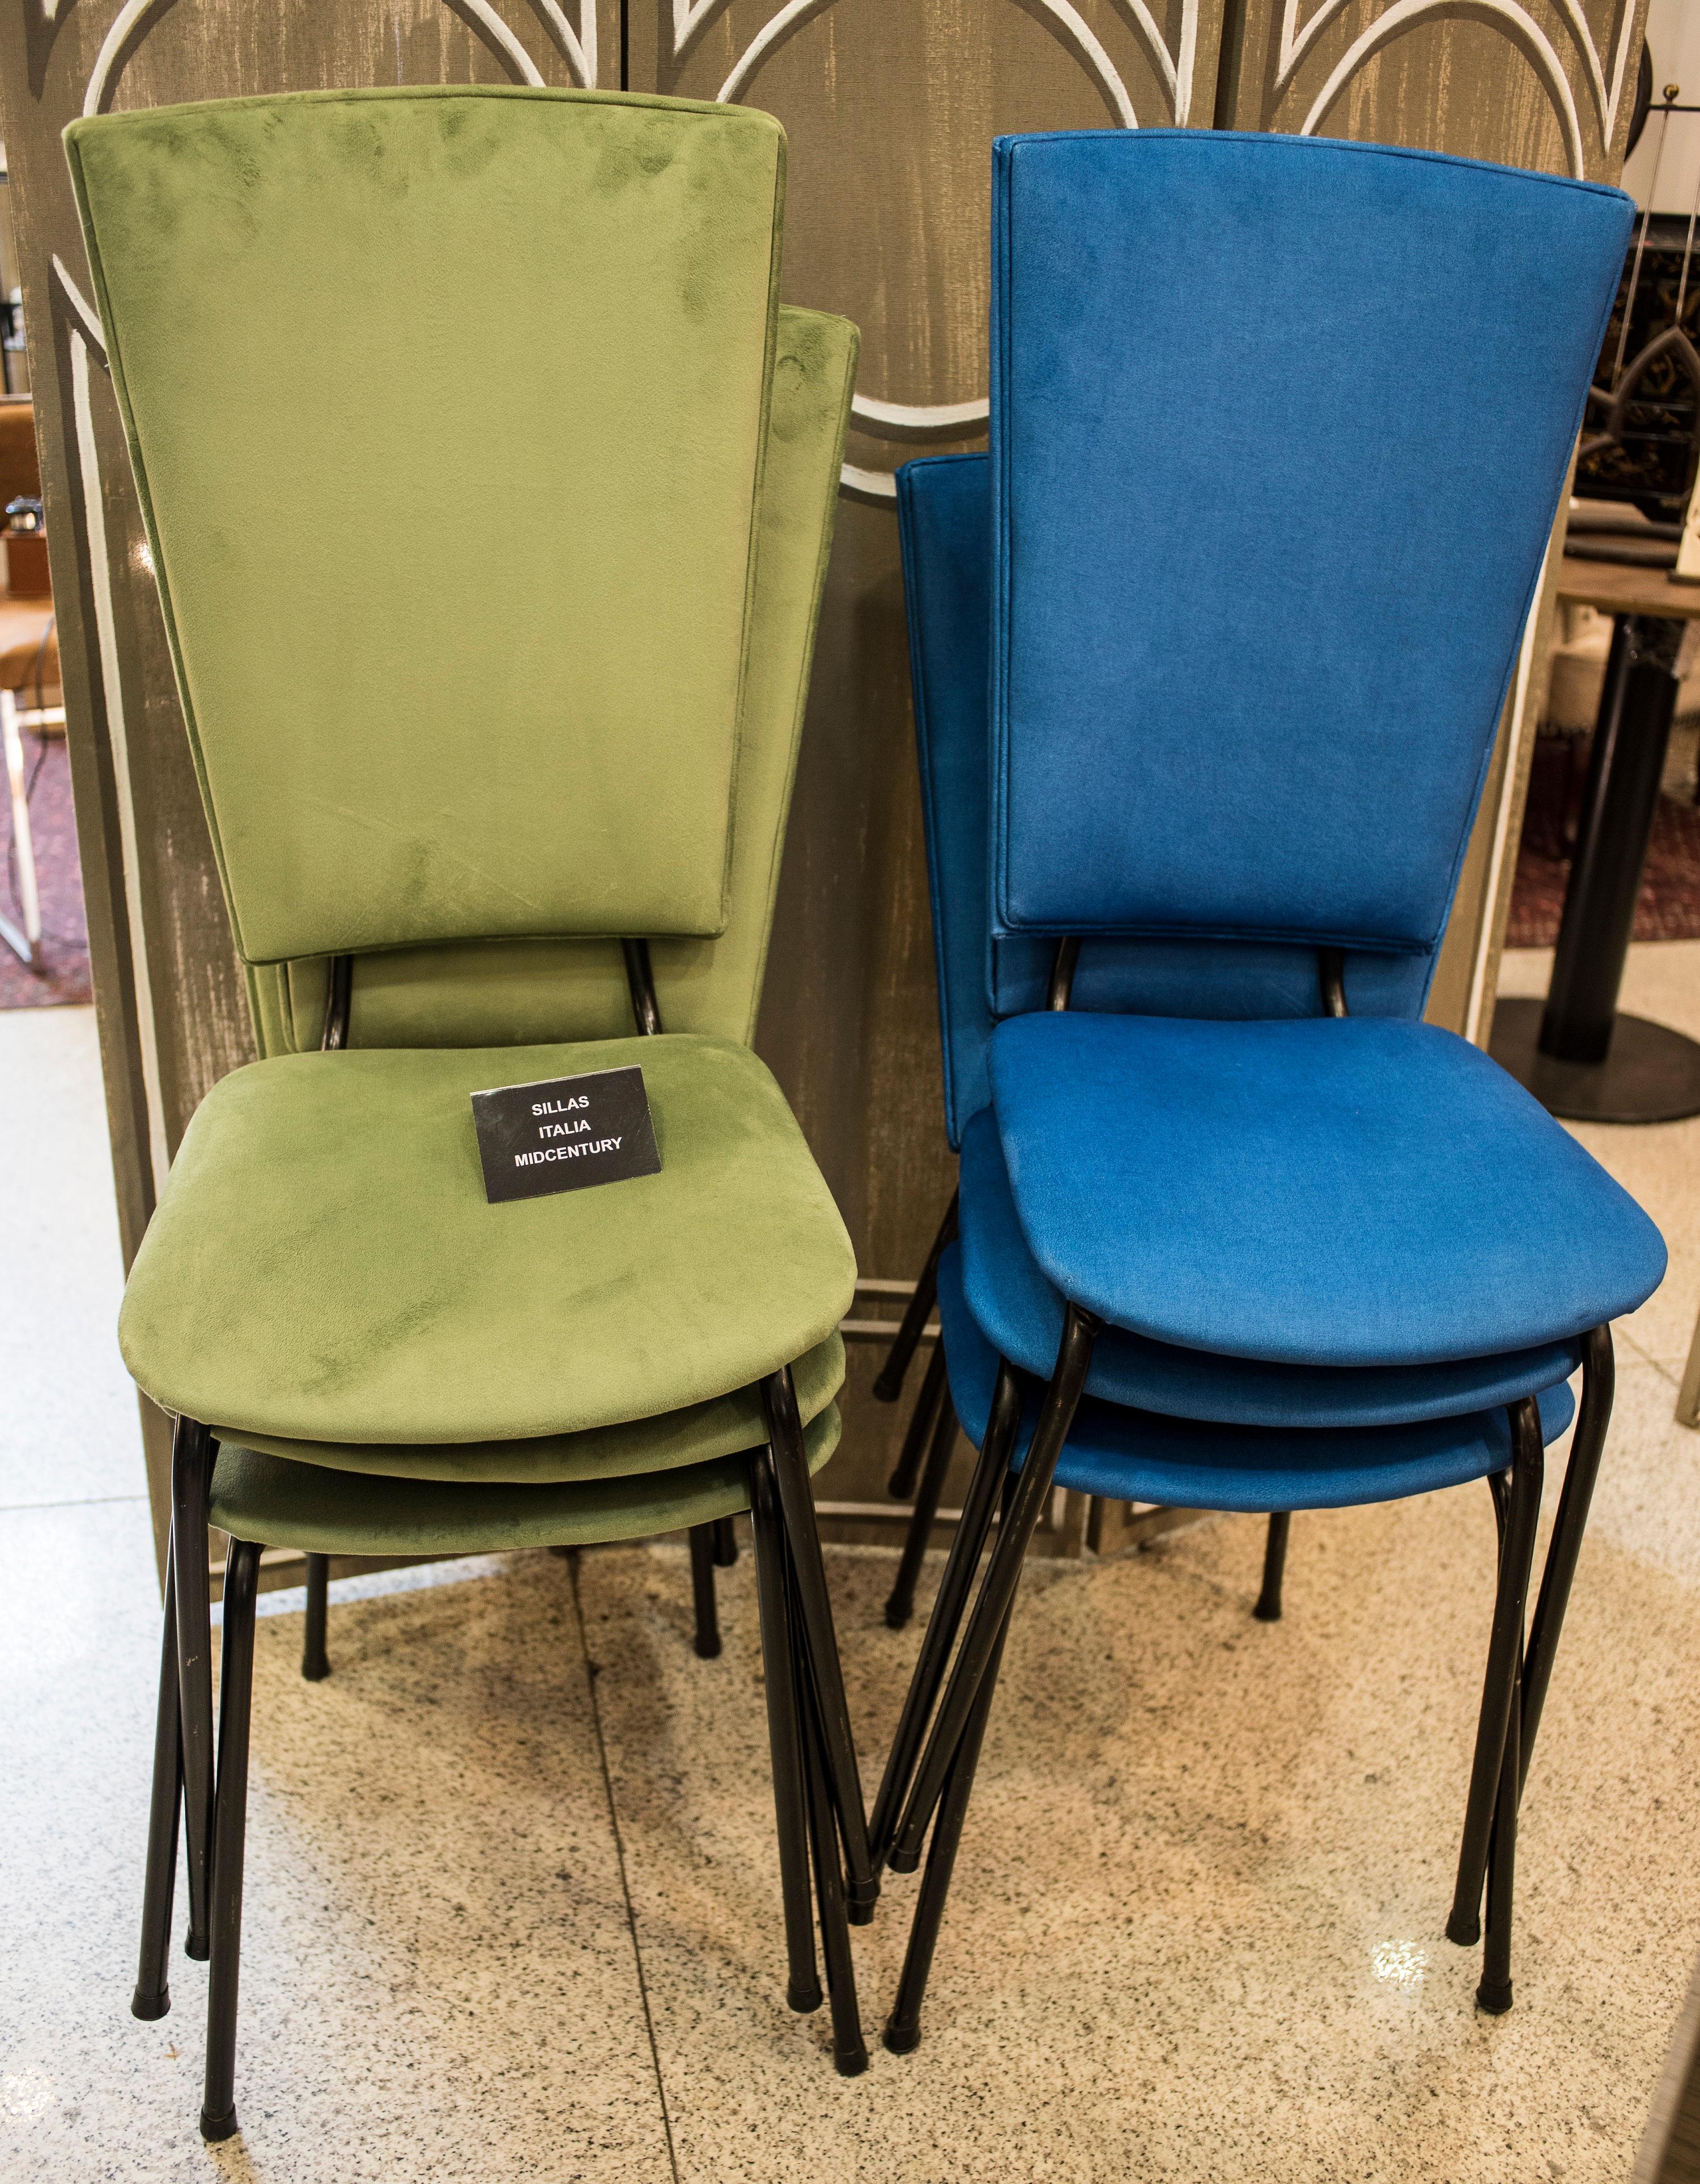 Amazing and funny set of 6 Italian chairs, with iron structure and legs and upholstered in blue and green velvet. Italy , 1950, midcentury.
They have a very fashion design with a long shovel in a glamorous style.
     